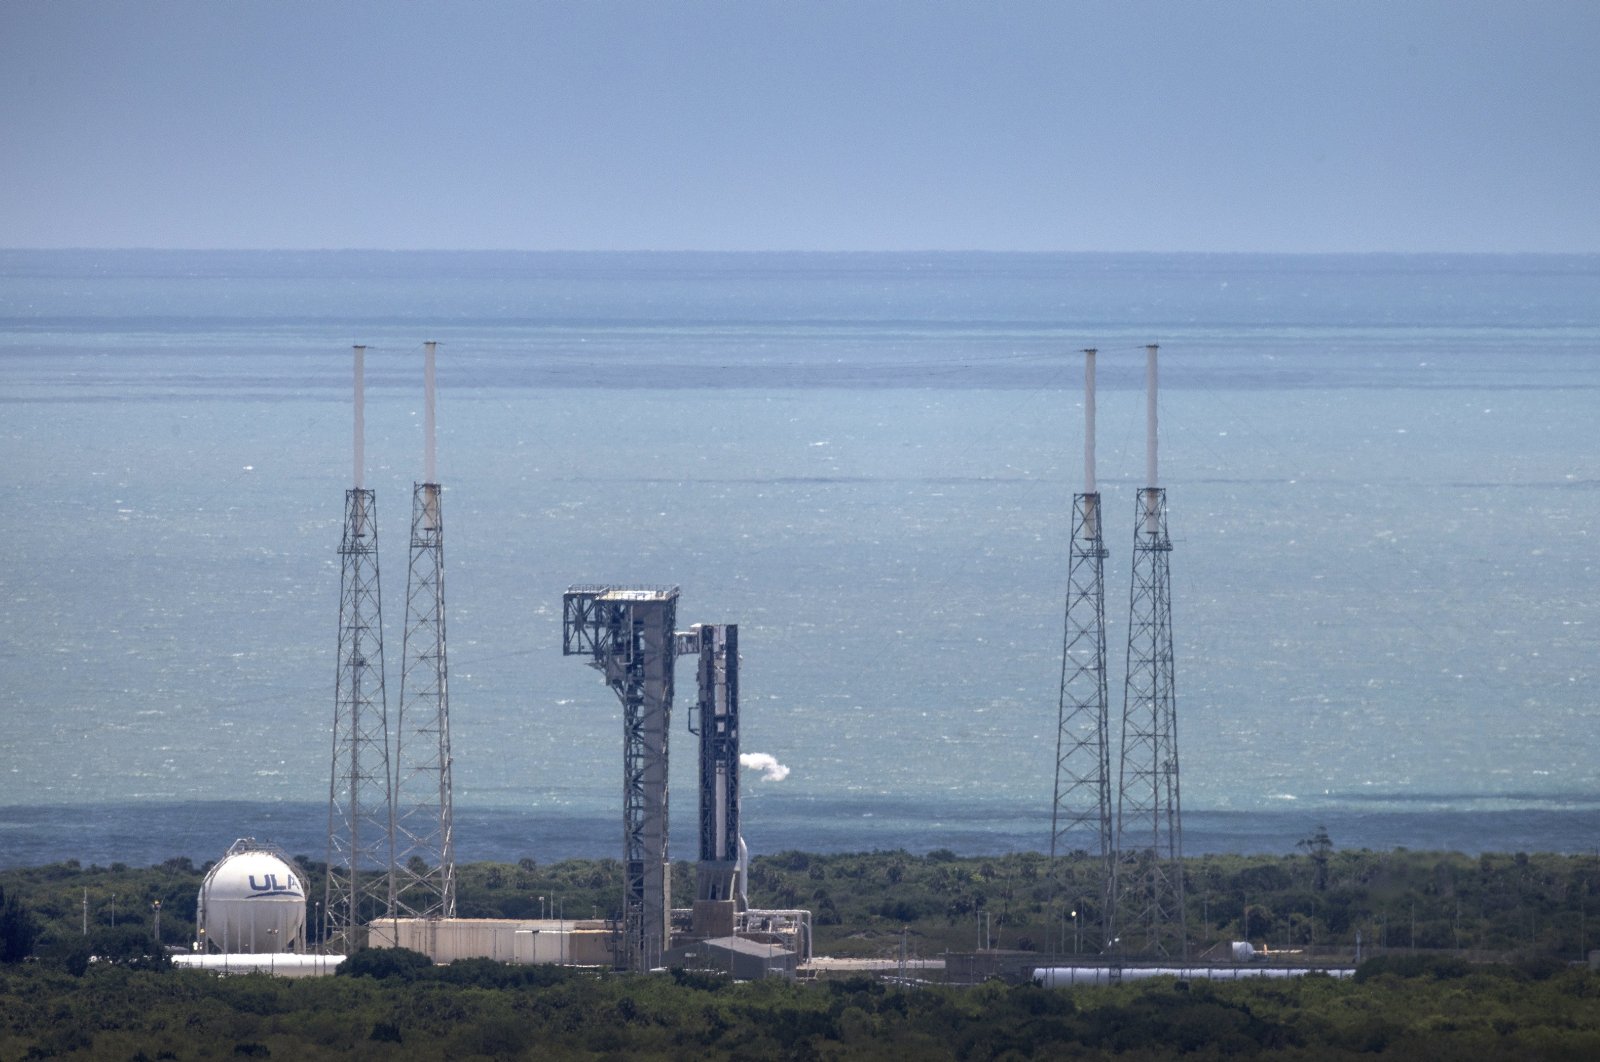 NASA Boeing Crew Flight Test mission Starliner spacecraft, on a United Launch Alliance Atlas V rocket, is docked on the Space Launch Complex-41 as the launch was scrubbed minutes before the liftoff, in Cape Canaveral Space Force Station, Florida, U.S., June 1, 2024. (EPA Photo)